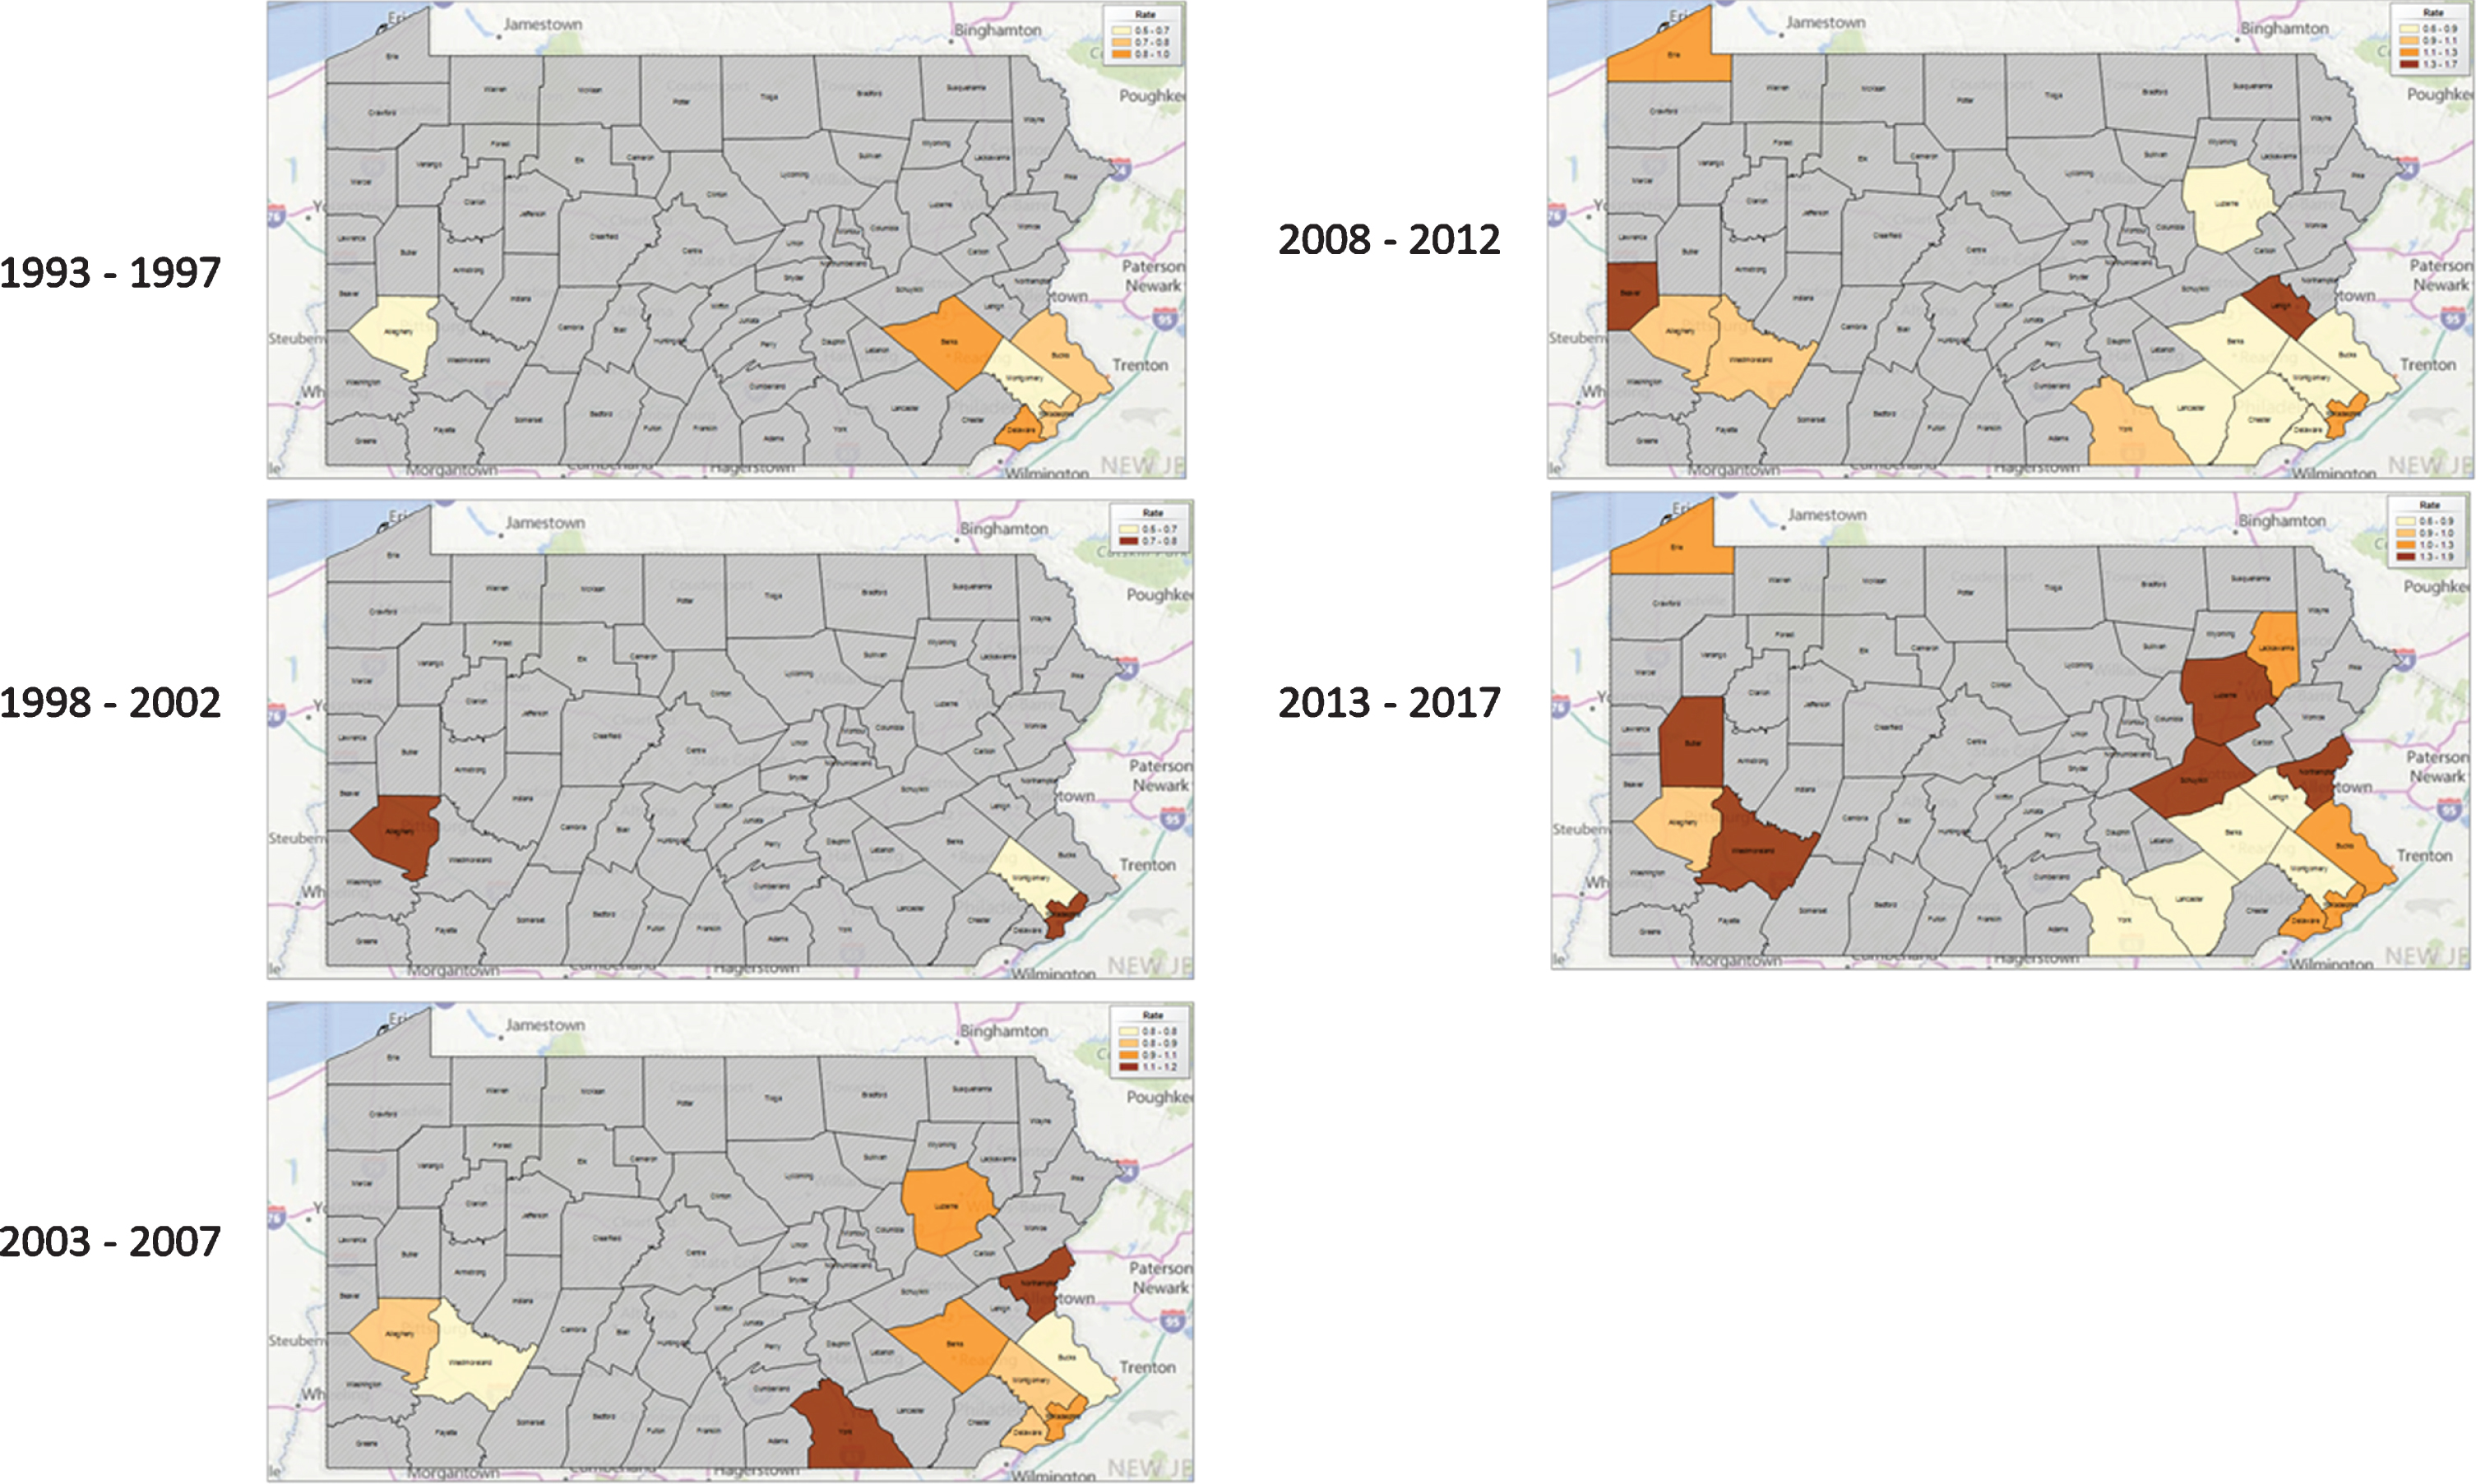 Age-Adjusted Distant Bladder Cancer Incidence Rates with Spatial Empirical Bayes Smoothing by County in 5-year intervals, 1993–2017.